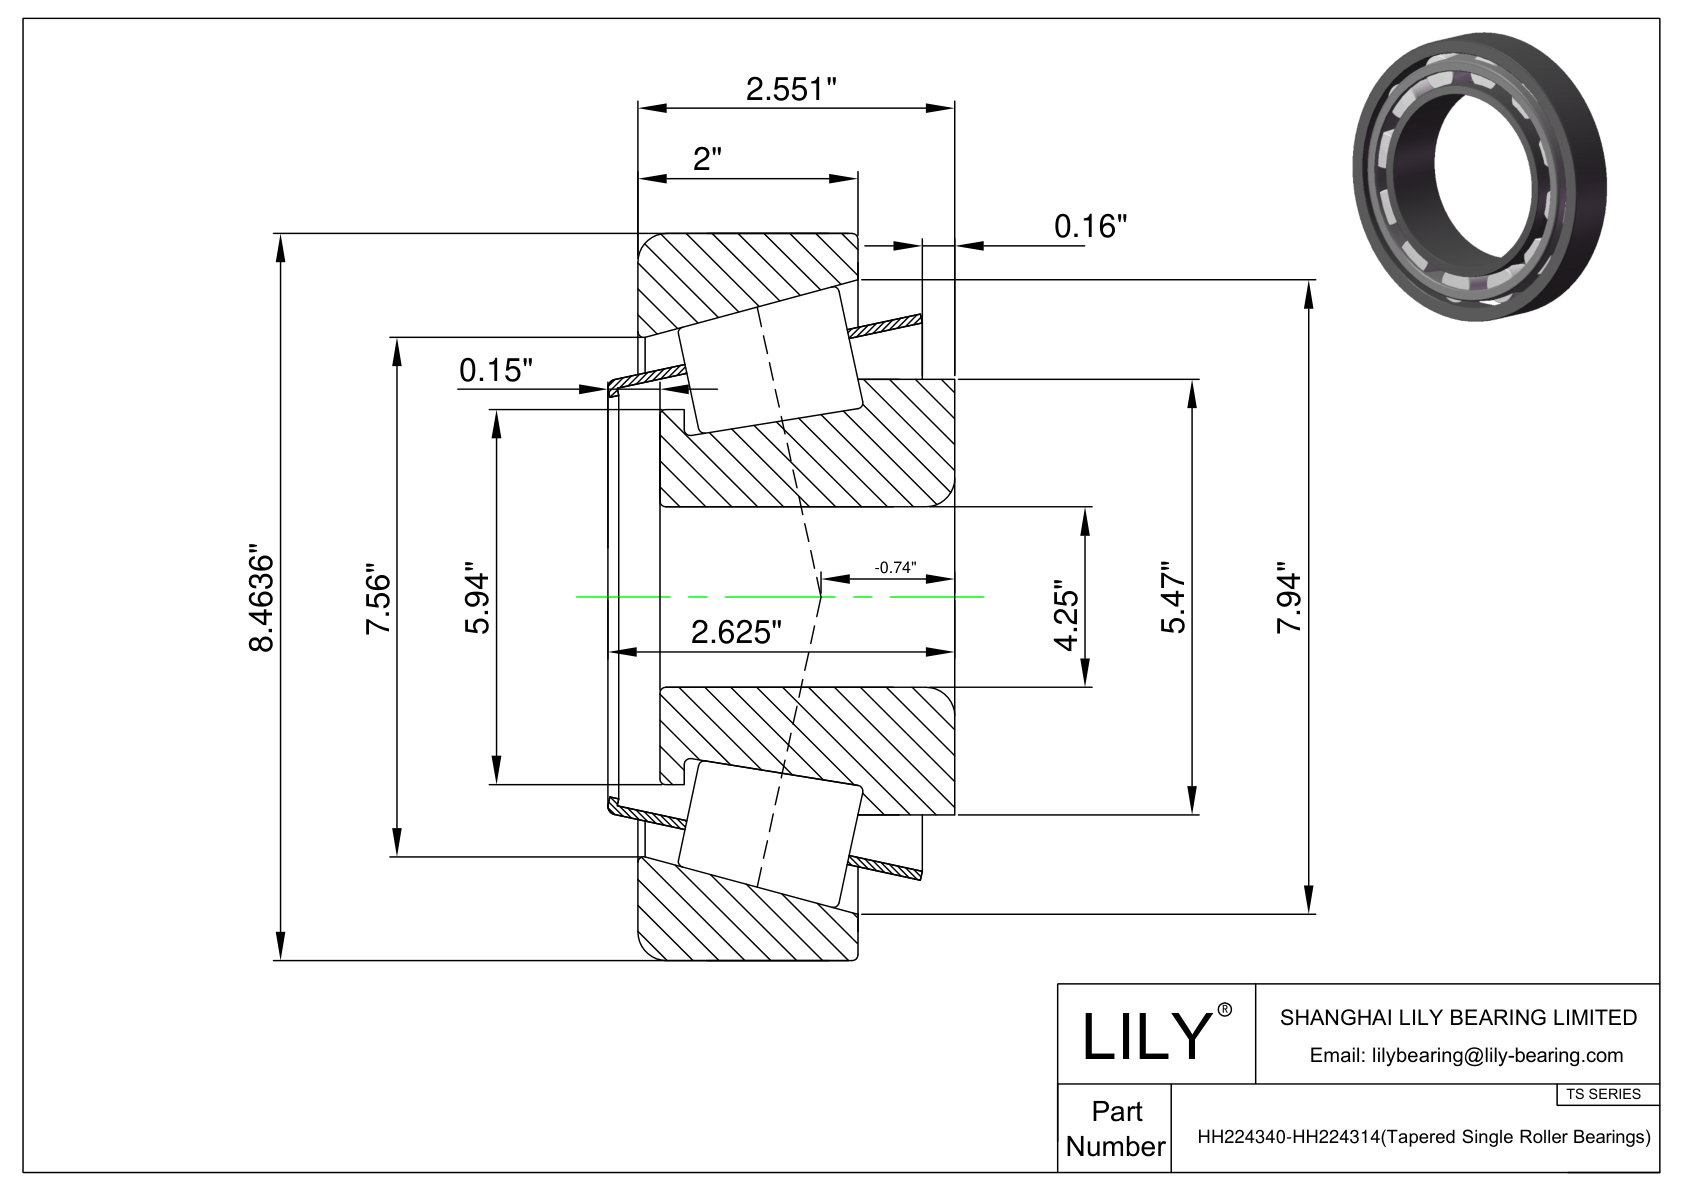 HH224340-HH224314 TS (Tapered Single Roller Bearings) (Imperial) cad drawing